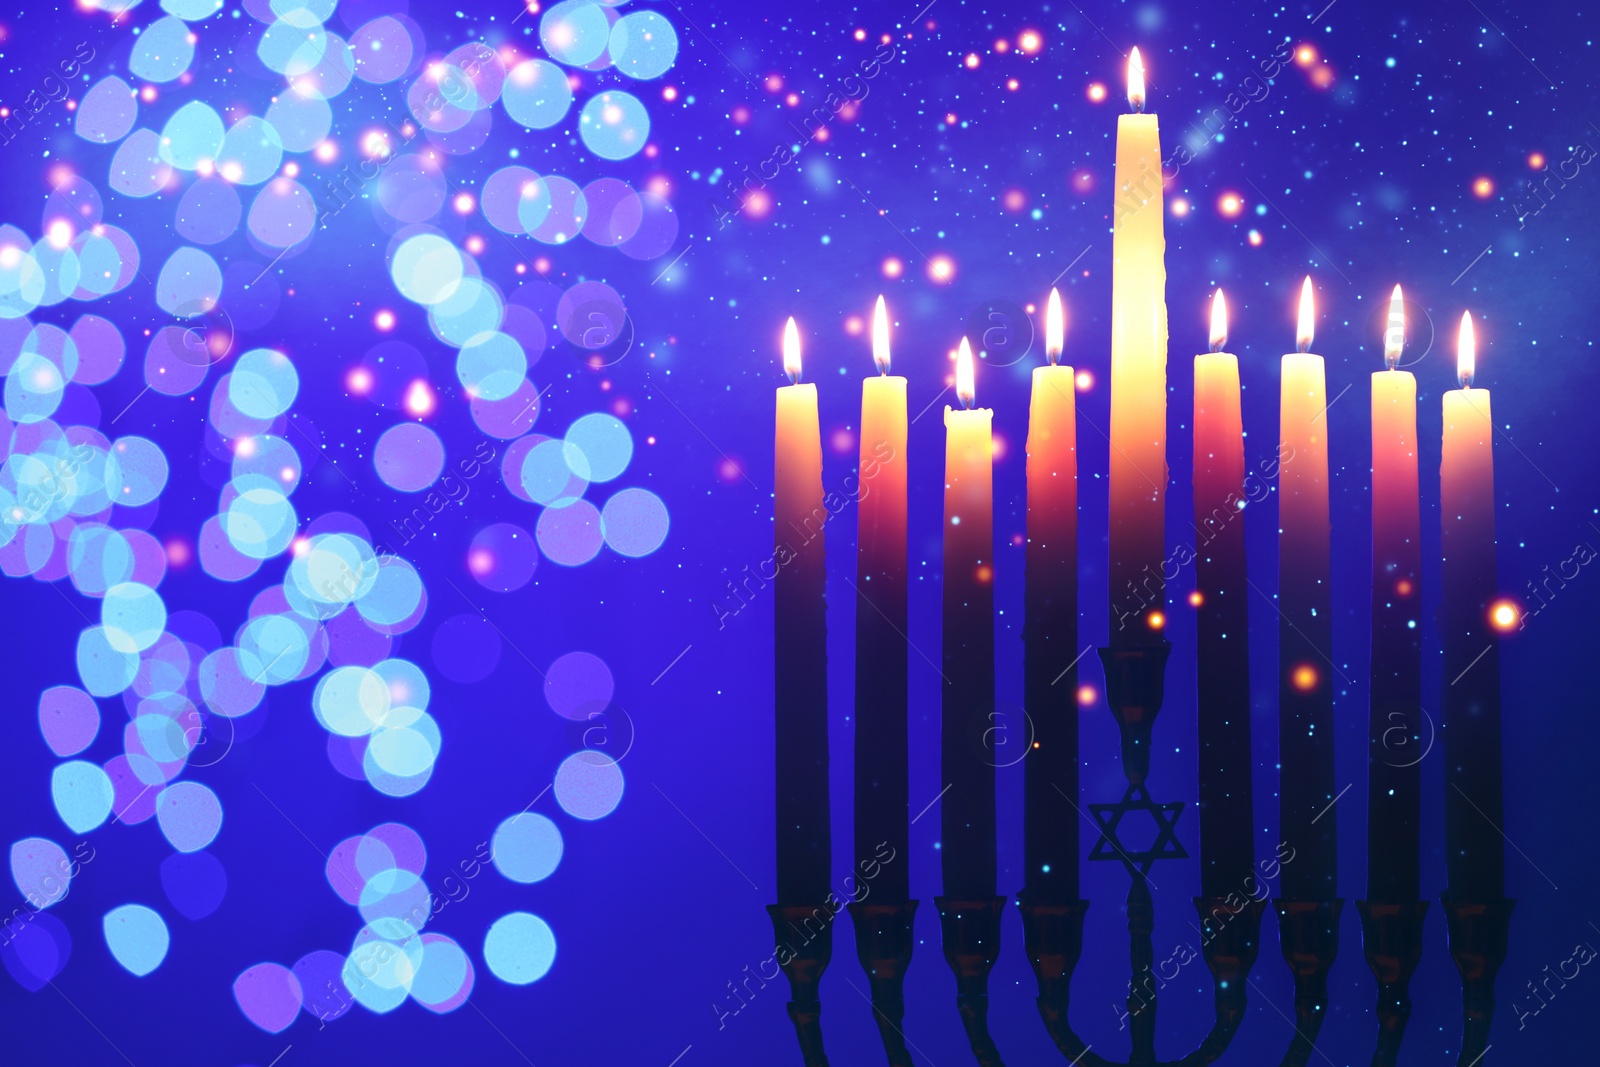 Image of Hanukkah celebration. Menorah with burning candles on blue background with blurred lights, closeup. Space for text